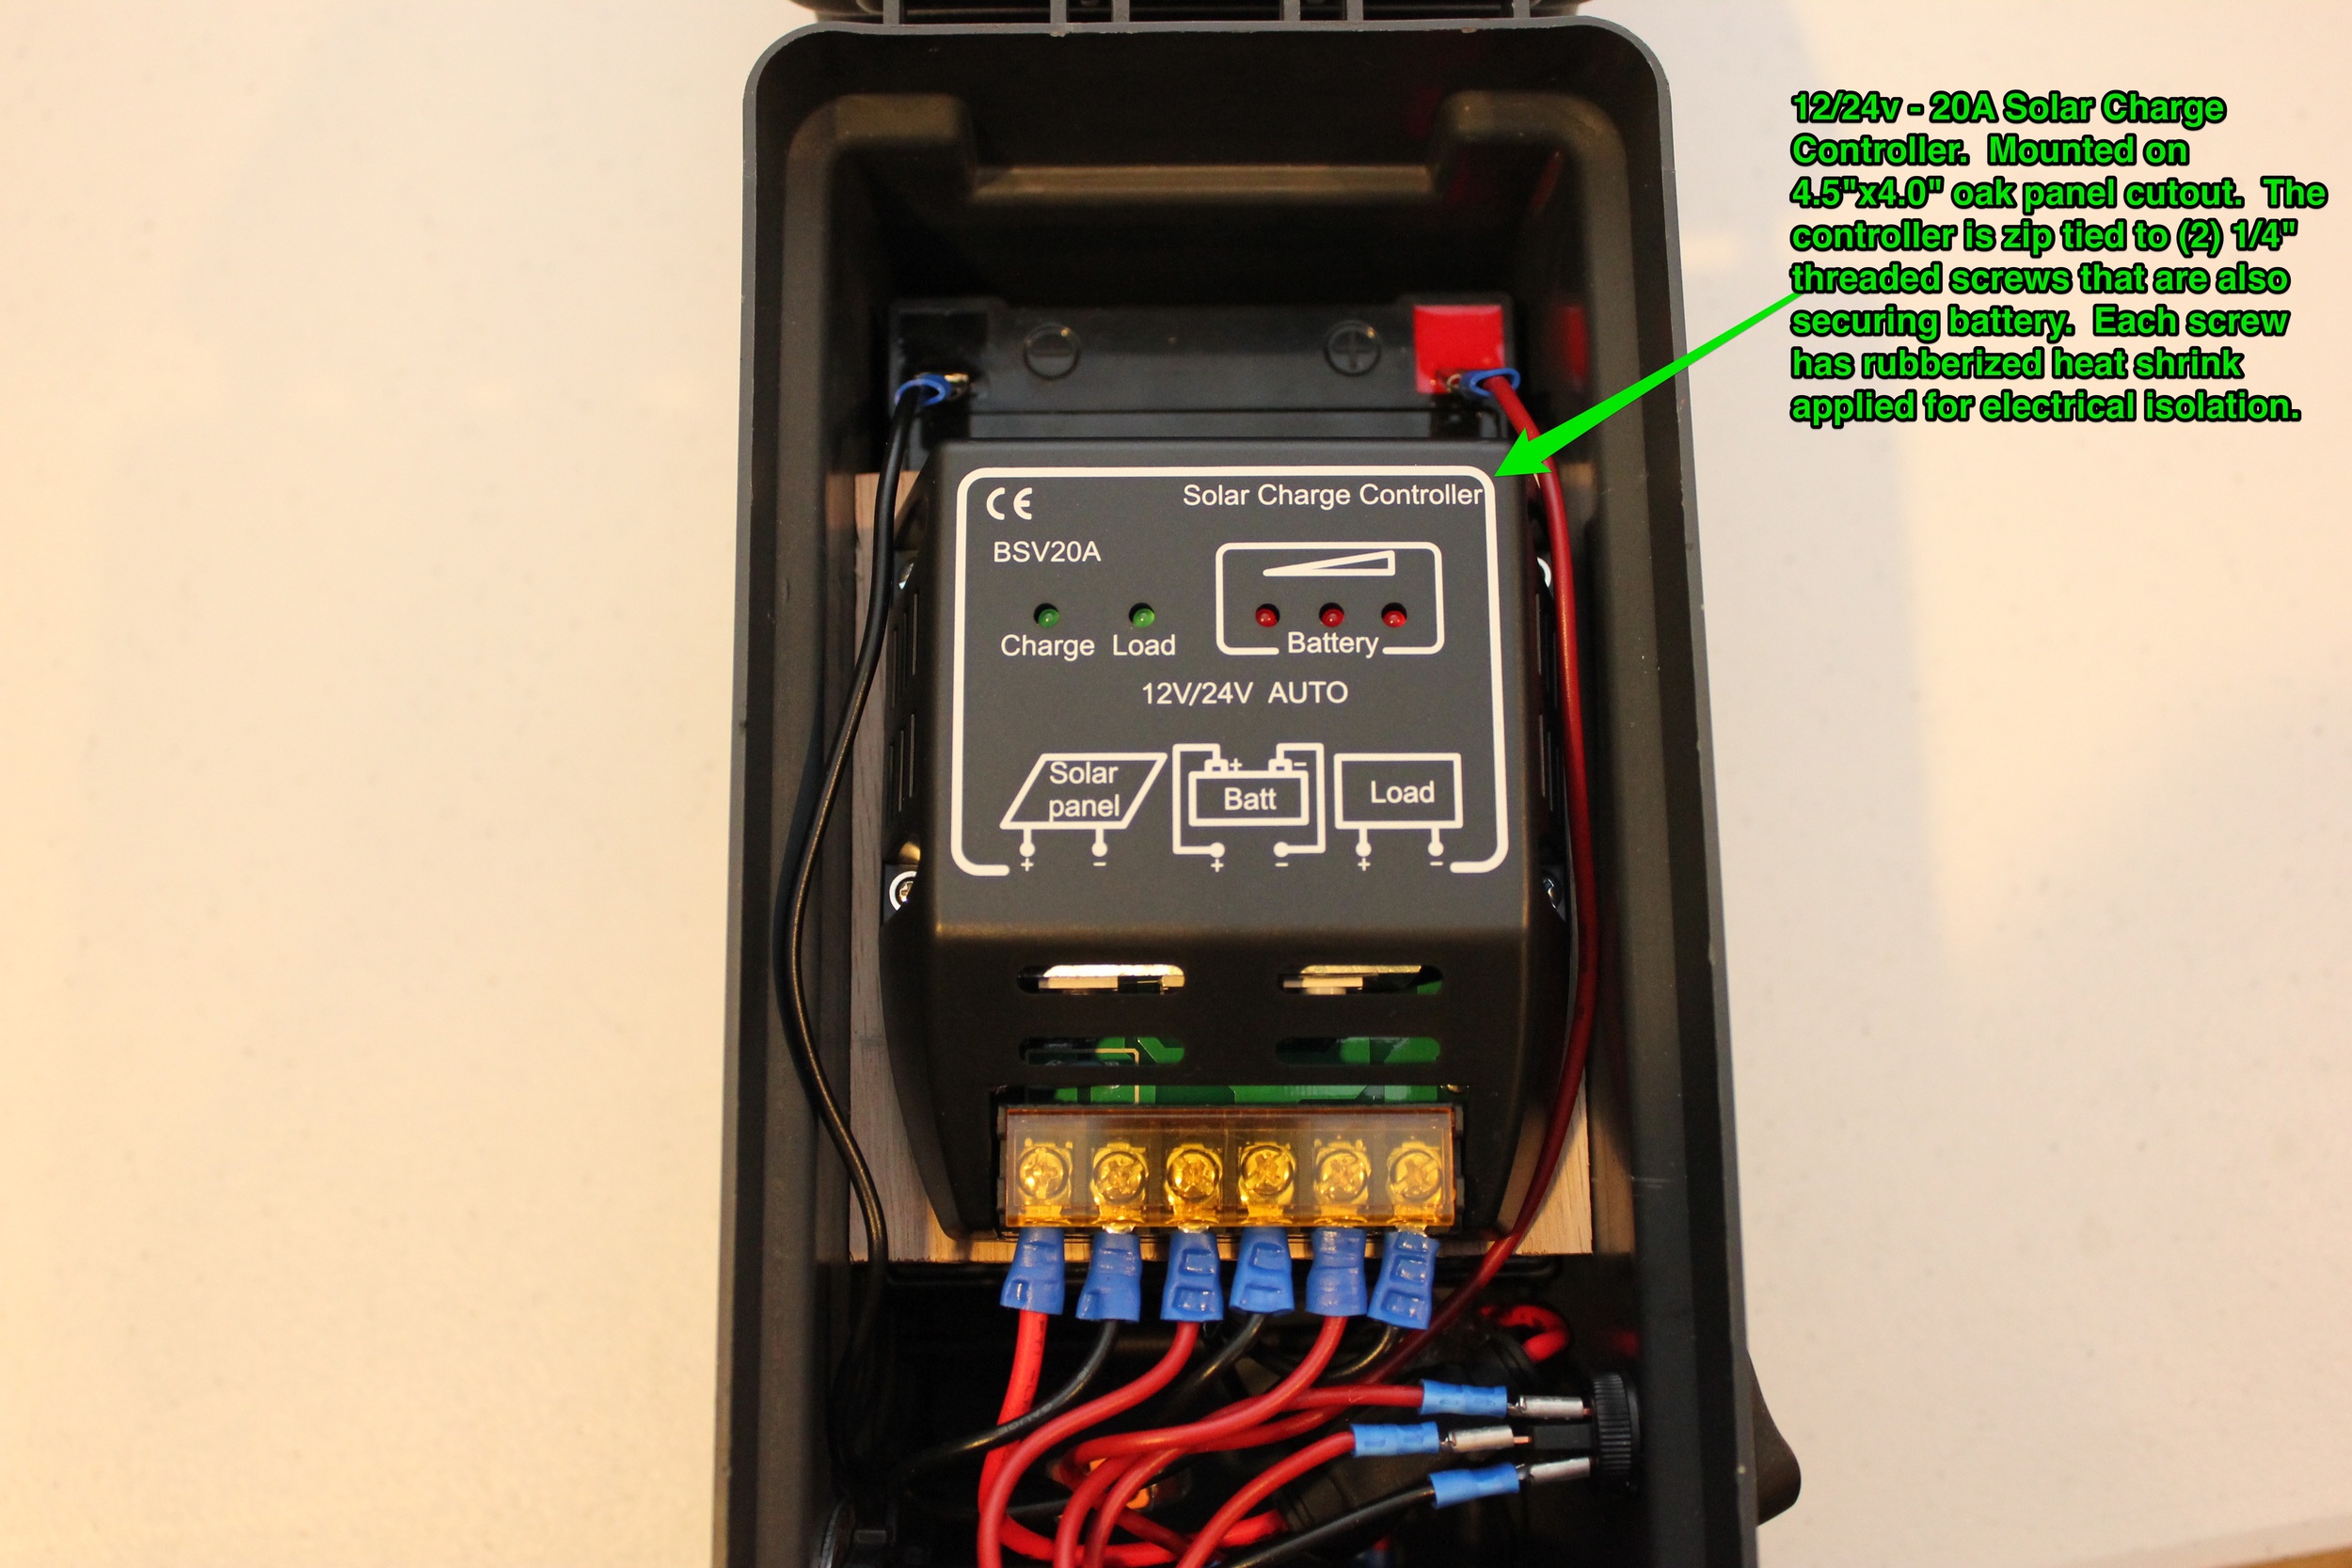 Charge controller properly mounted